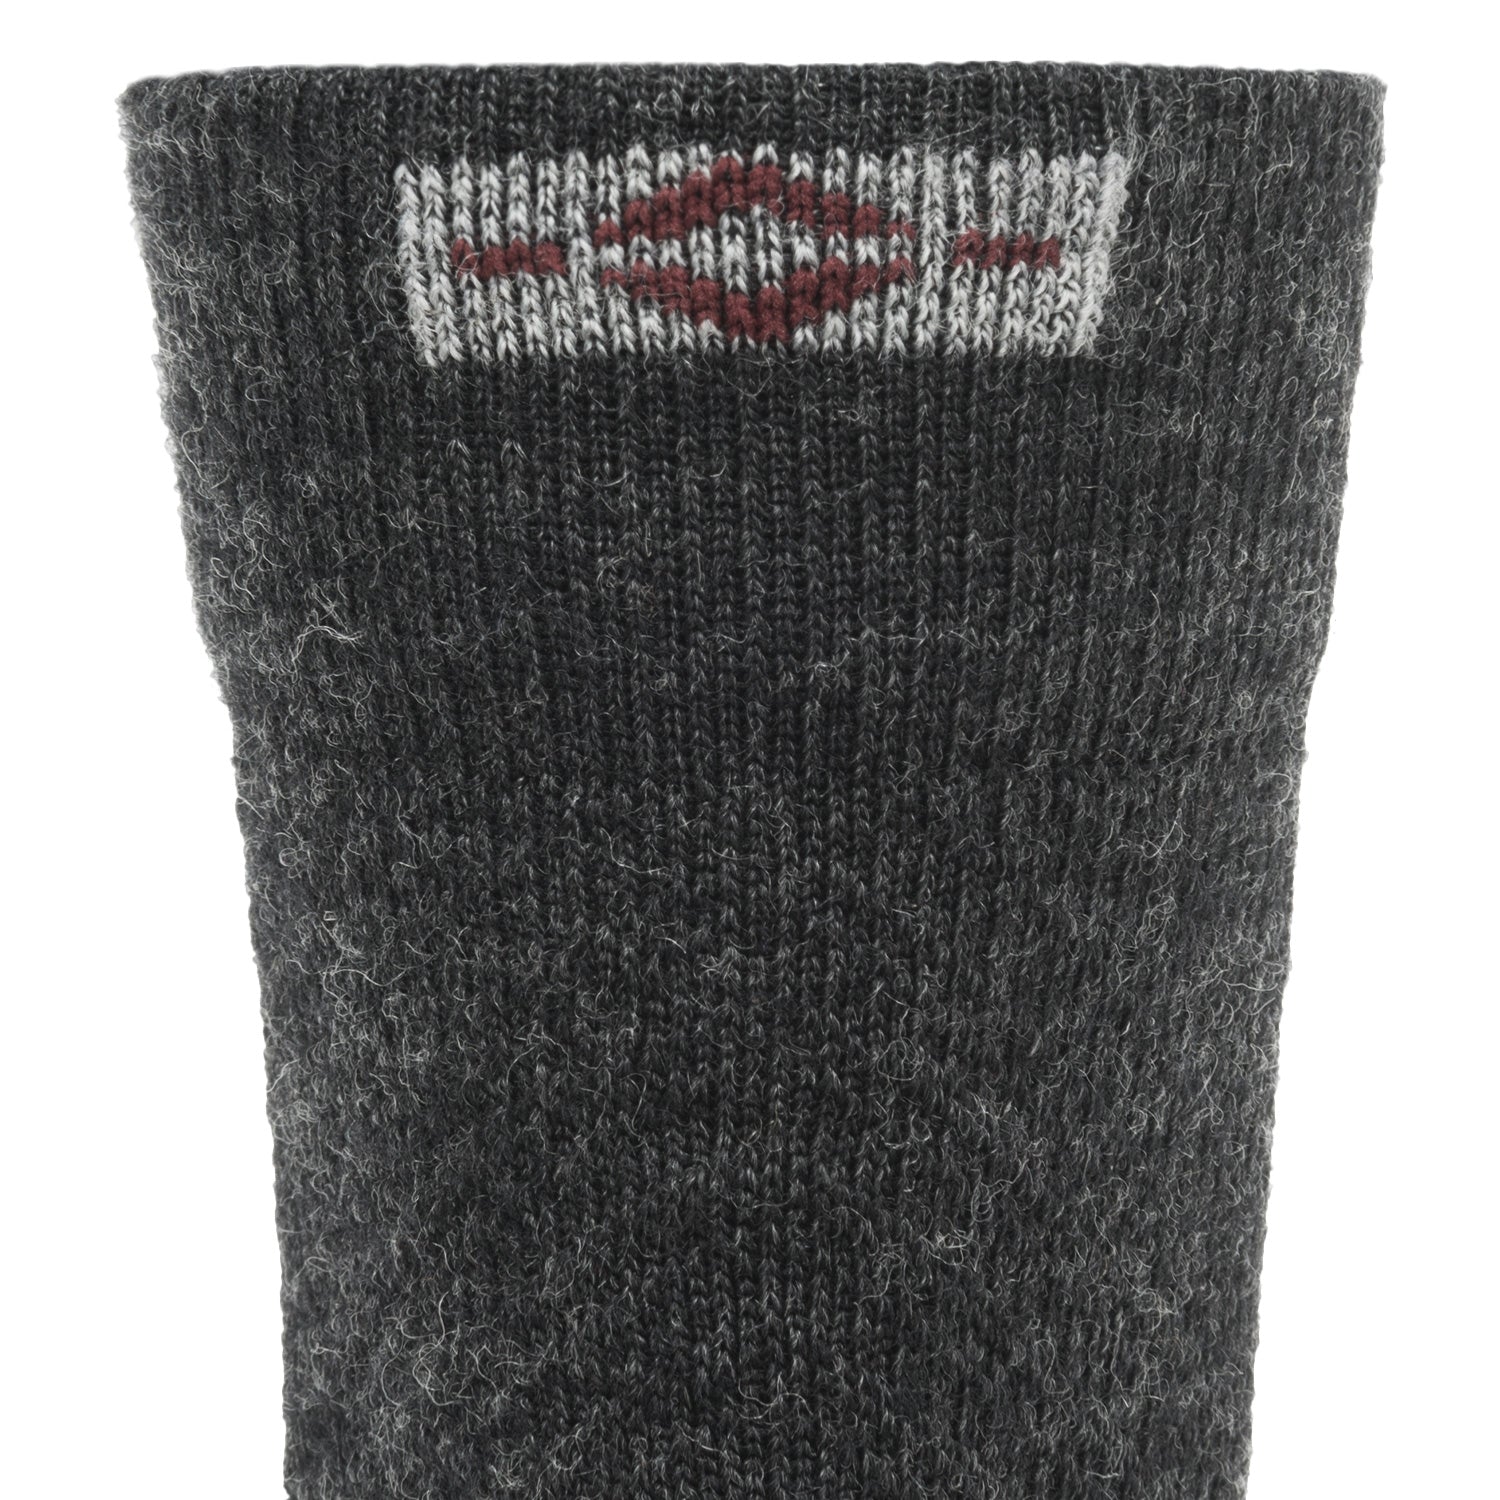 Axiom Mid Crew Sock With Merino Wool - Oxford cuff perspective - made in The USA Wigwam Socks